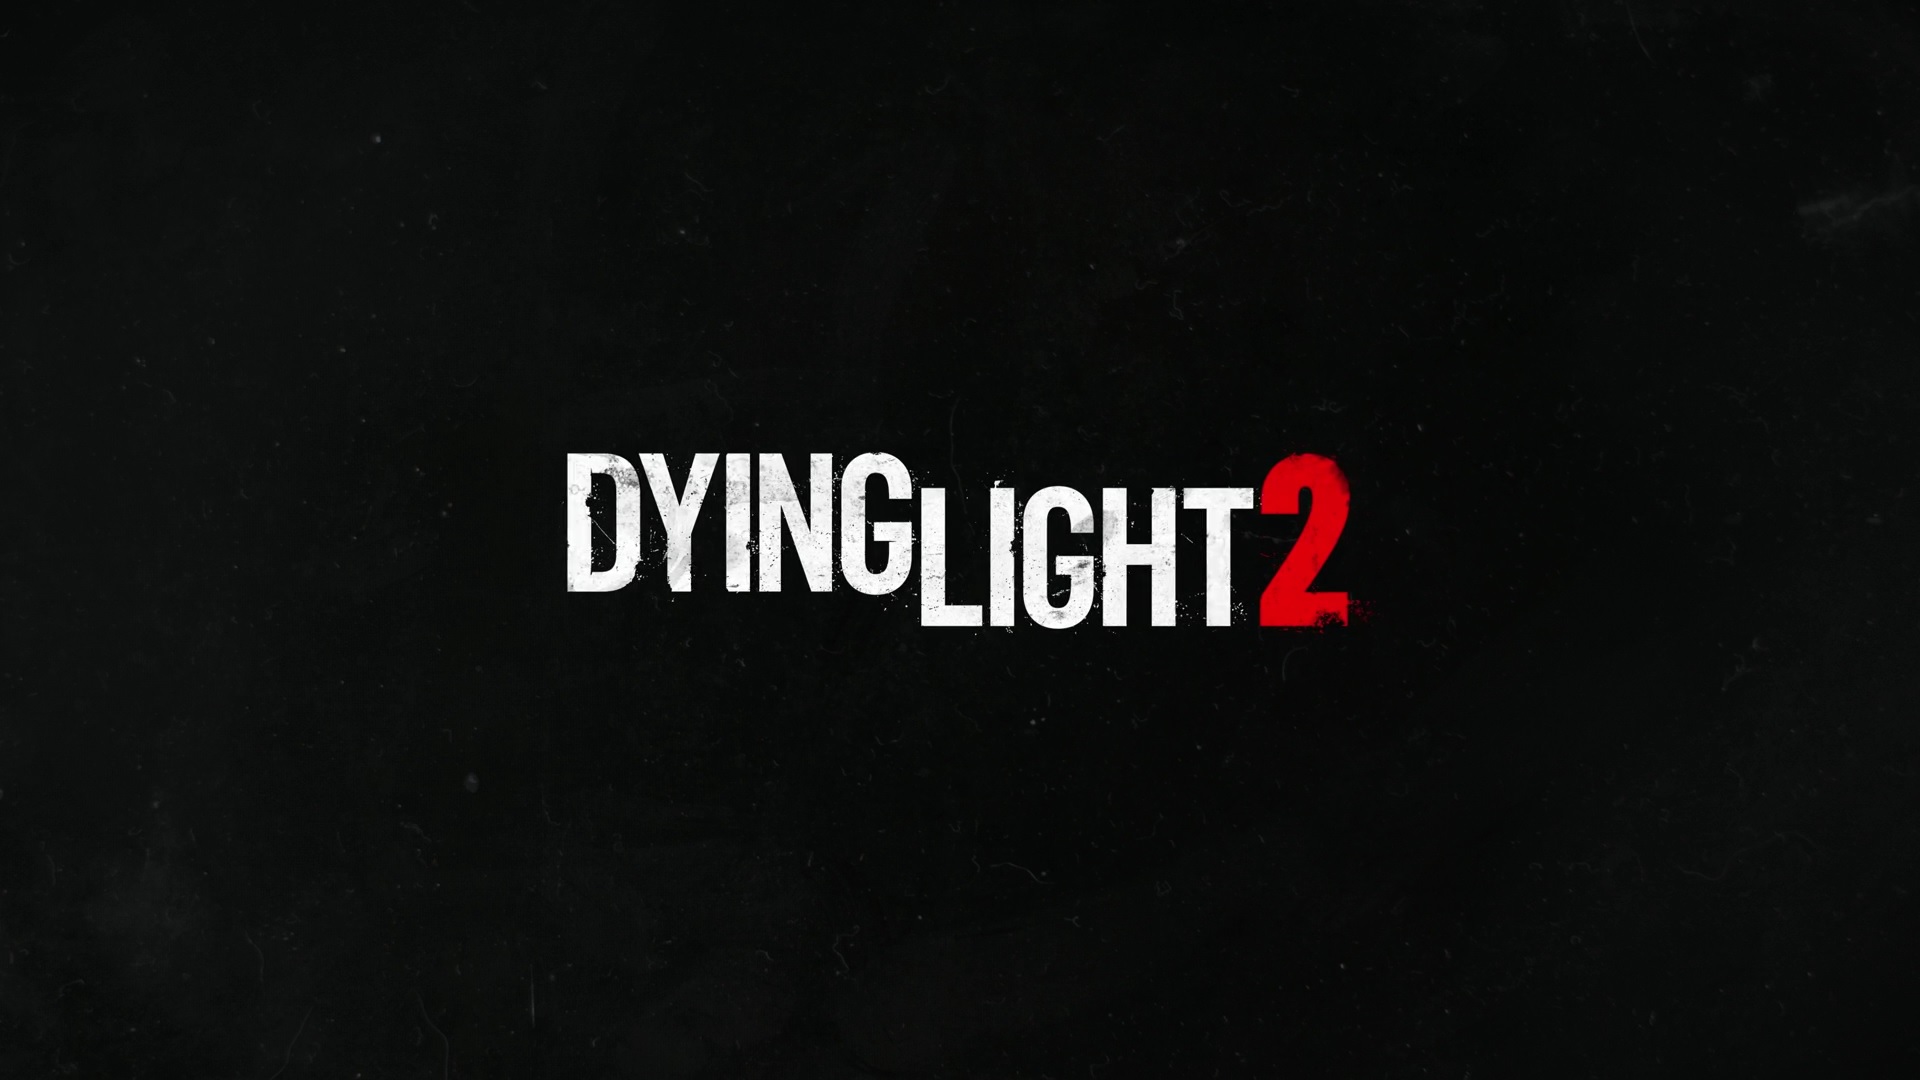 Dying Light 2 Announced for PC, PS4, and Xbox One